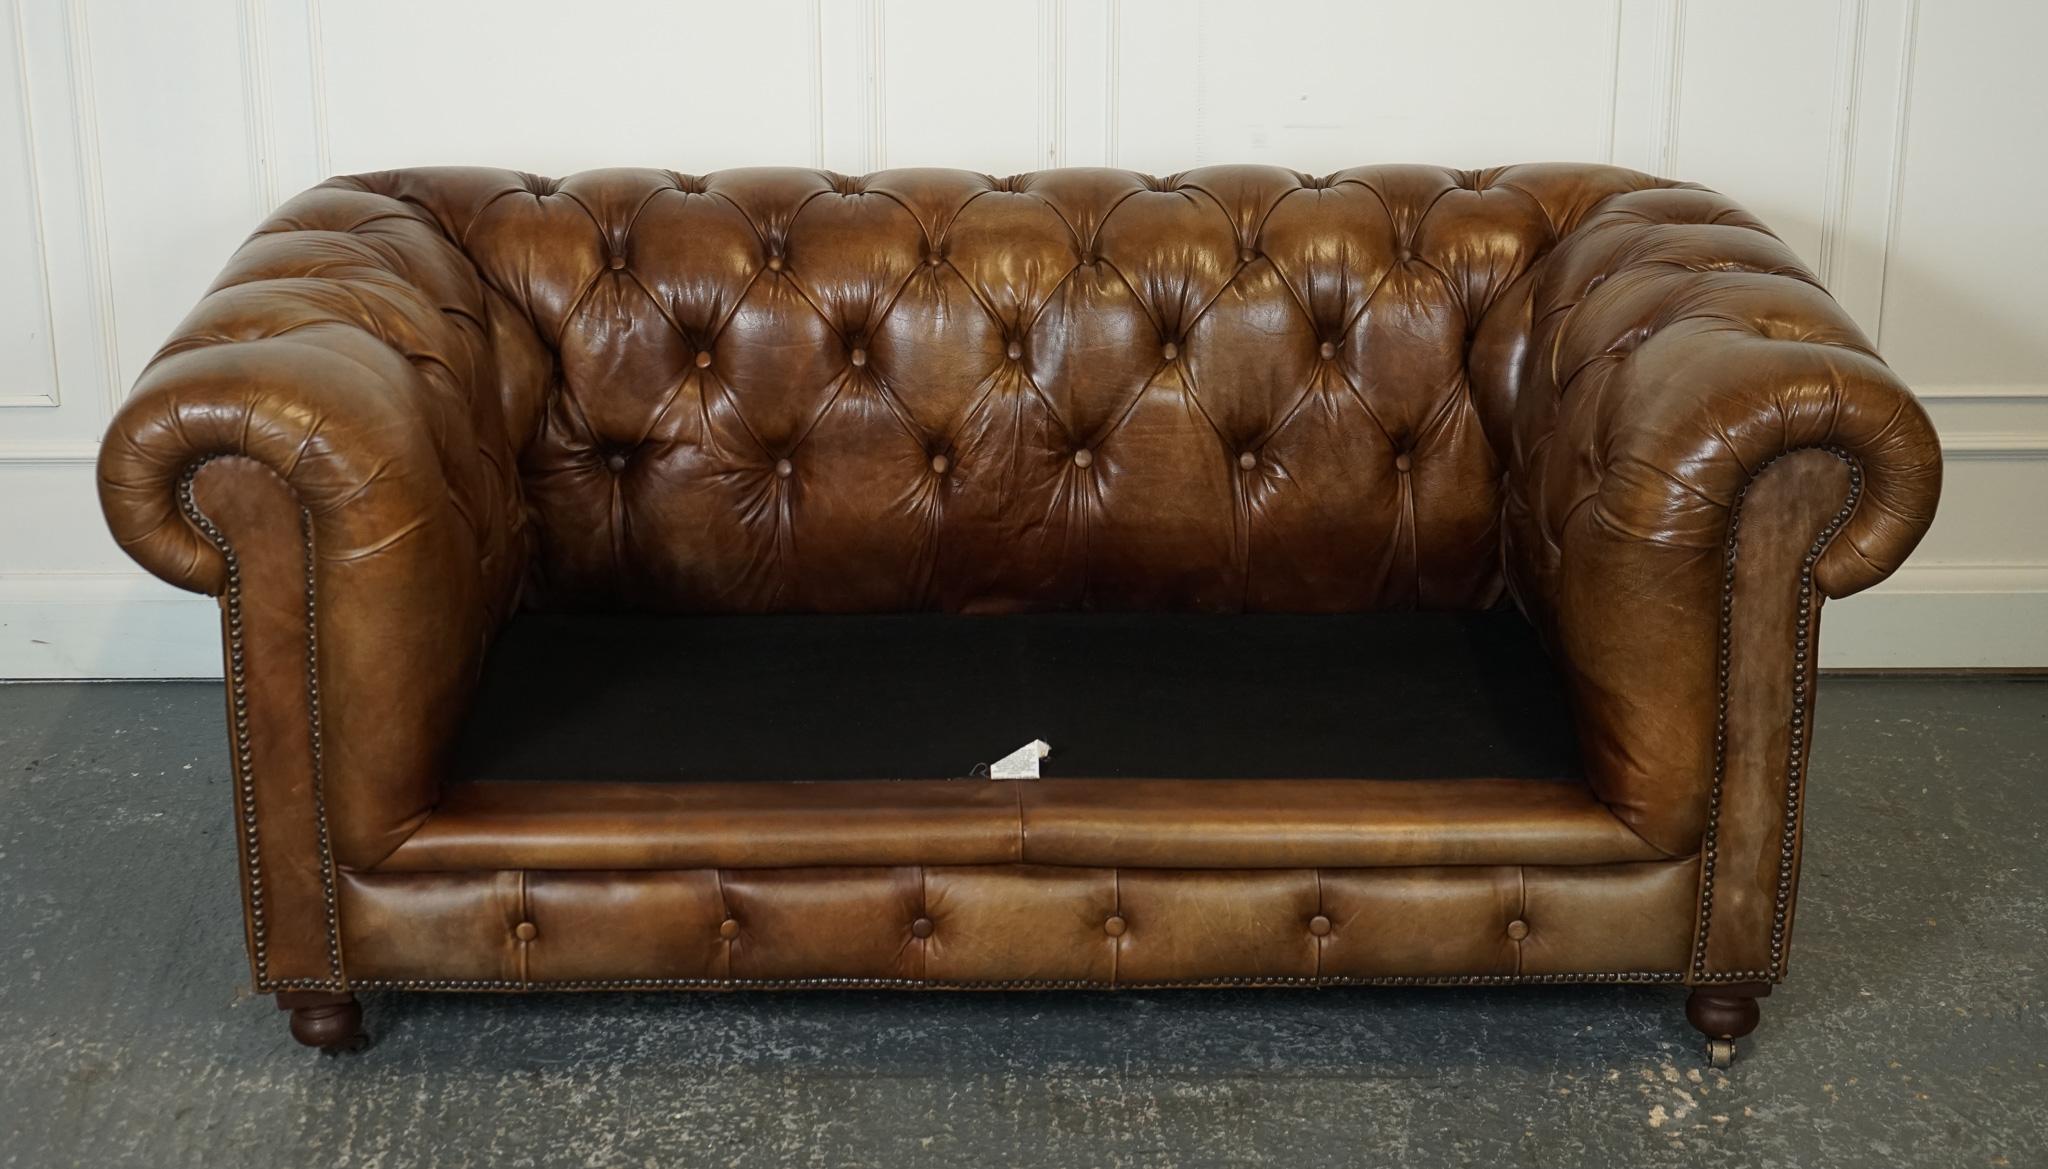 GORGEOUS TIMOTHY OULTON CHESTERFIELD SOFA BY HALO HERiTAGE BROWN LEATHER J1 For Sale 3